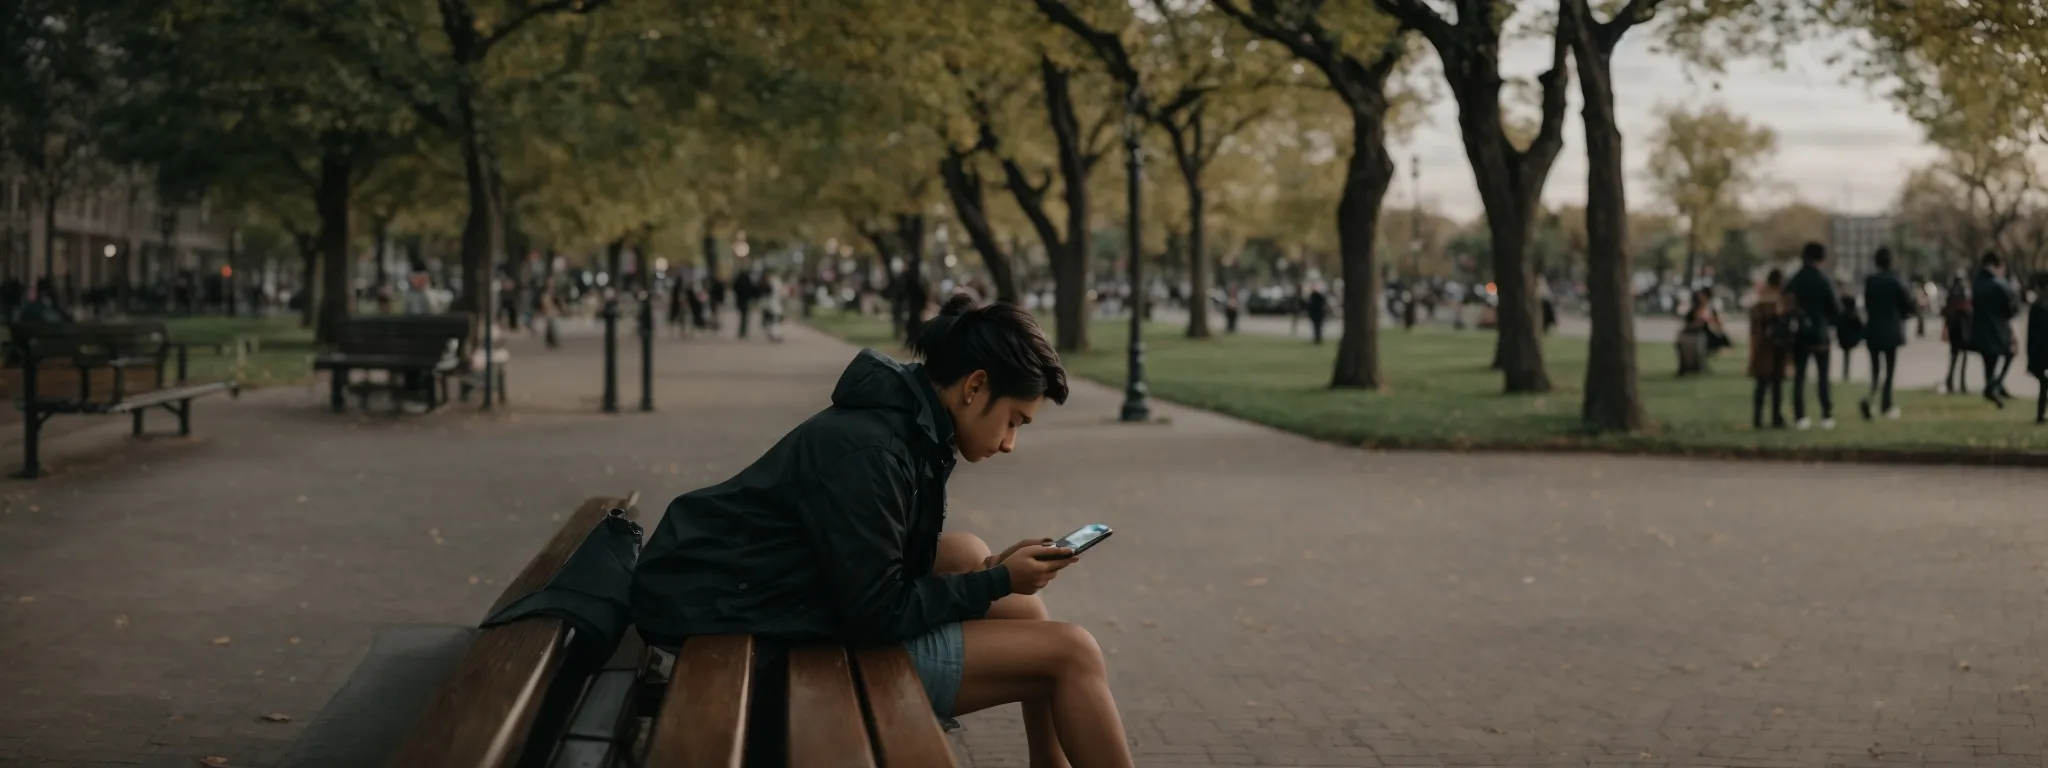 a person sitting on a park bench, deeply engrossed in browsing on a smartphone.